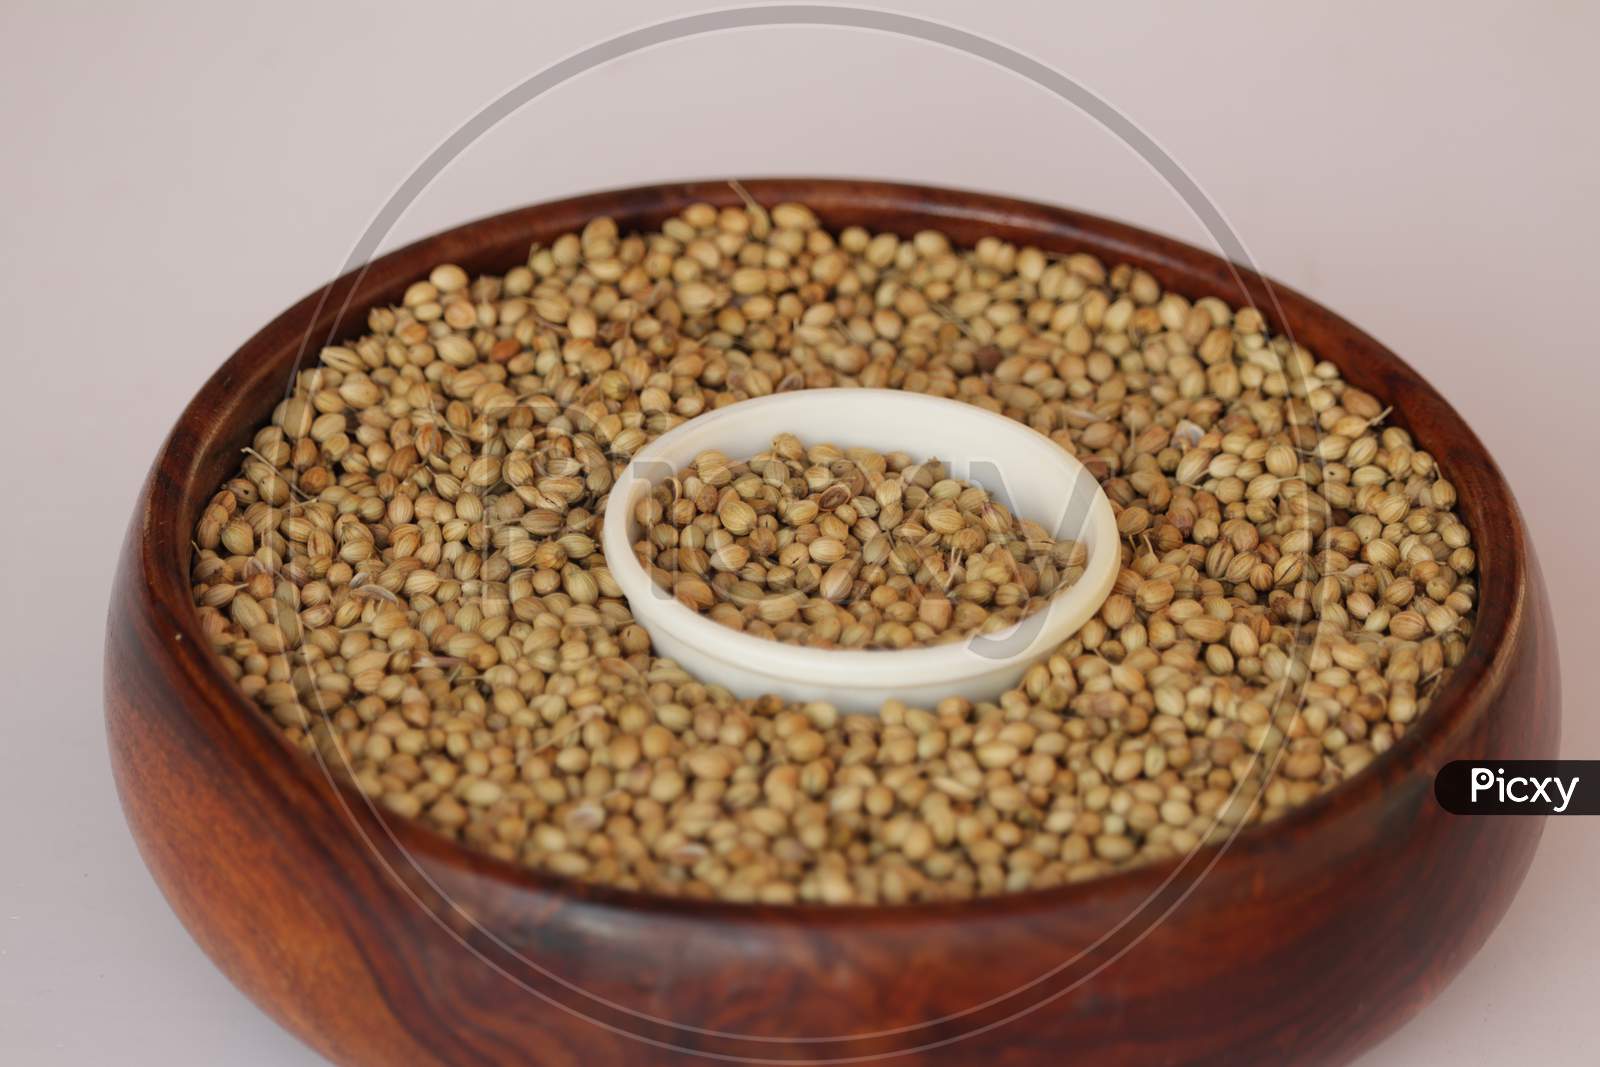 Coriander In Bowl On Wooden Background,Coriander Seeds In A Big Wooden Bowl,Healthy Eating,Indian Spice,Flavouring,Selective Focus,Dried Coriander Seed Bowl